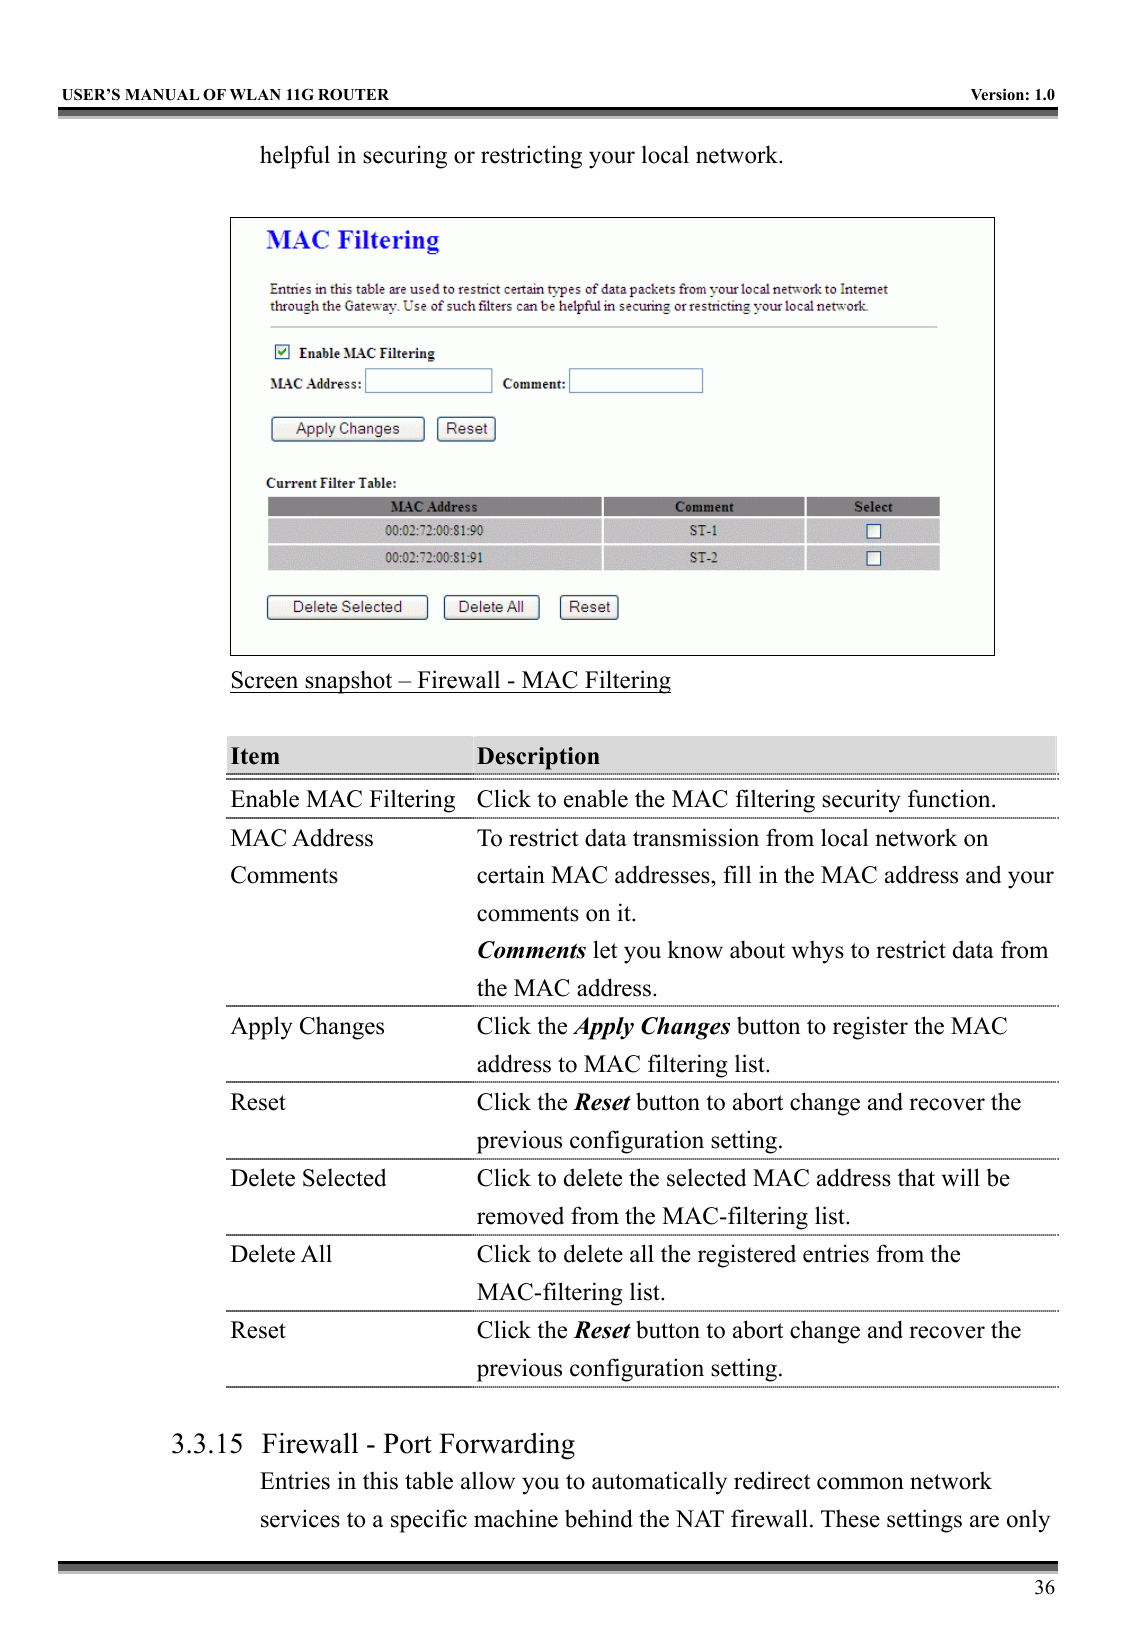   USER’S MANUAL OF WLAN 11G ROUTER    Version: 1.0     36 helpful in securing or restricting your local network.   Screen snapshot – Firewall - MAC Filtering  Item  Description   Enable MAC Filtering  Click to enable the MAC filtering security function. MAC Address Comments To restrict data transmission from local network on certain MAC addresses, fill in the MAC address and your comments on it. Comments let you know about whys to restrict data from the MAC address. Apply Changes  Click the Apply Changes button to register the MAC address to MAC filtering list. Reset Click the Reset button to abort change and recover the previous configuration setting. Delete Selected  Click to delete the selected MAC address that will be removed from the MAC-filtering list. Delete All  Click to delete all the registered entries from the MAC-filtering list.   Reset Click the Reset button to abort change and recover the previous configuration setting.  3.3.15  Firewall - Port Forwarding Entries in this table allow you to automatically redirect common network services to a specific machine behind the NAT firewall. These settings are only 